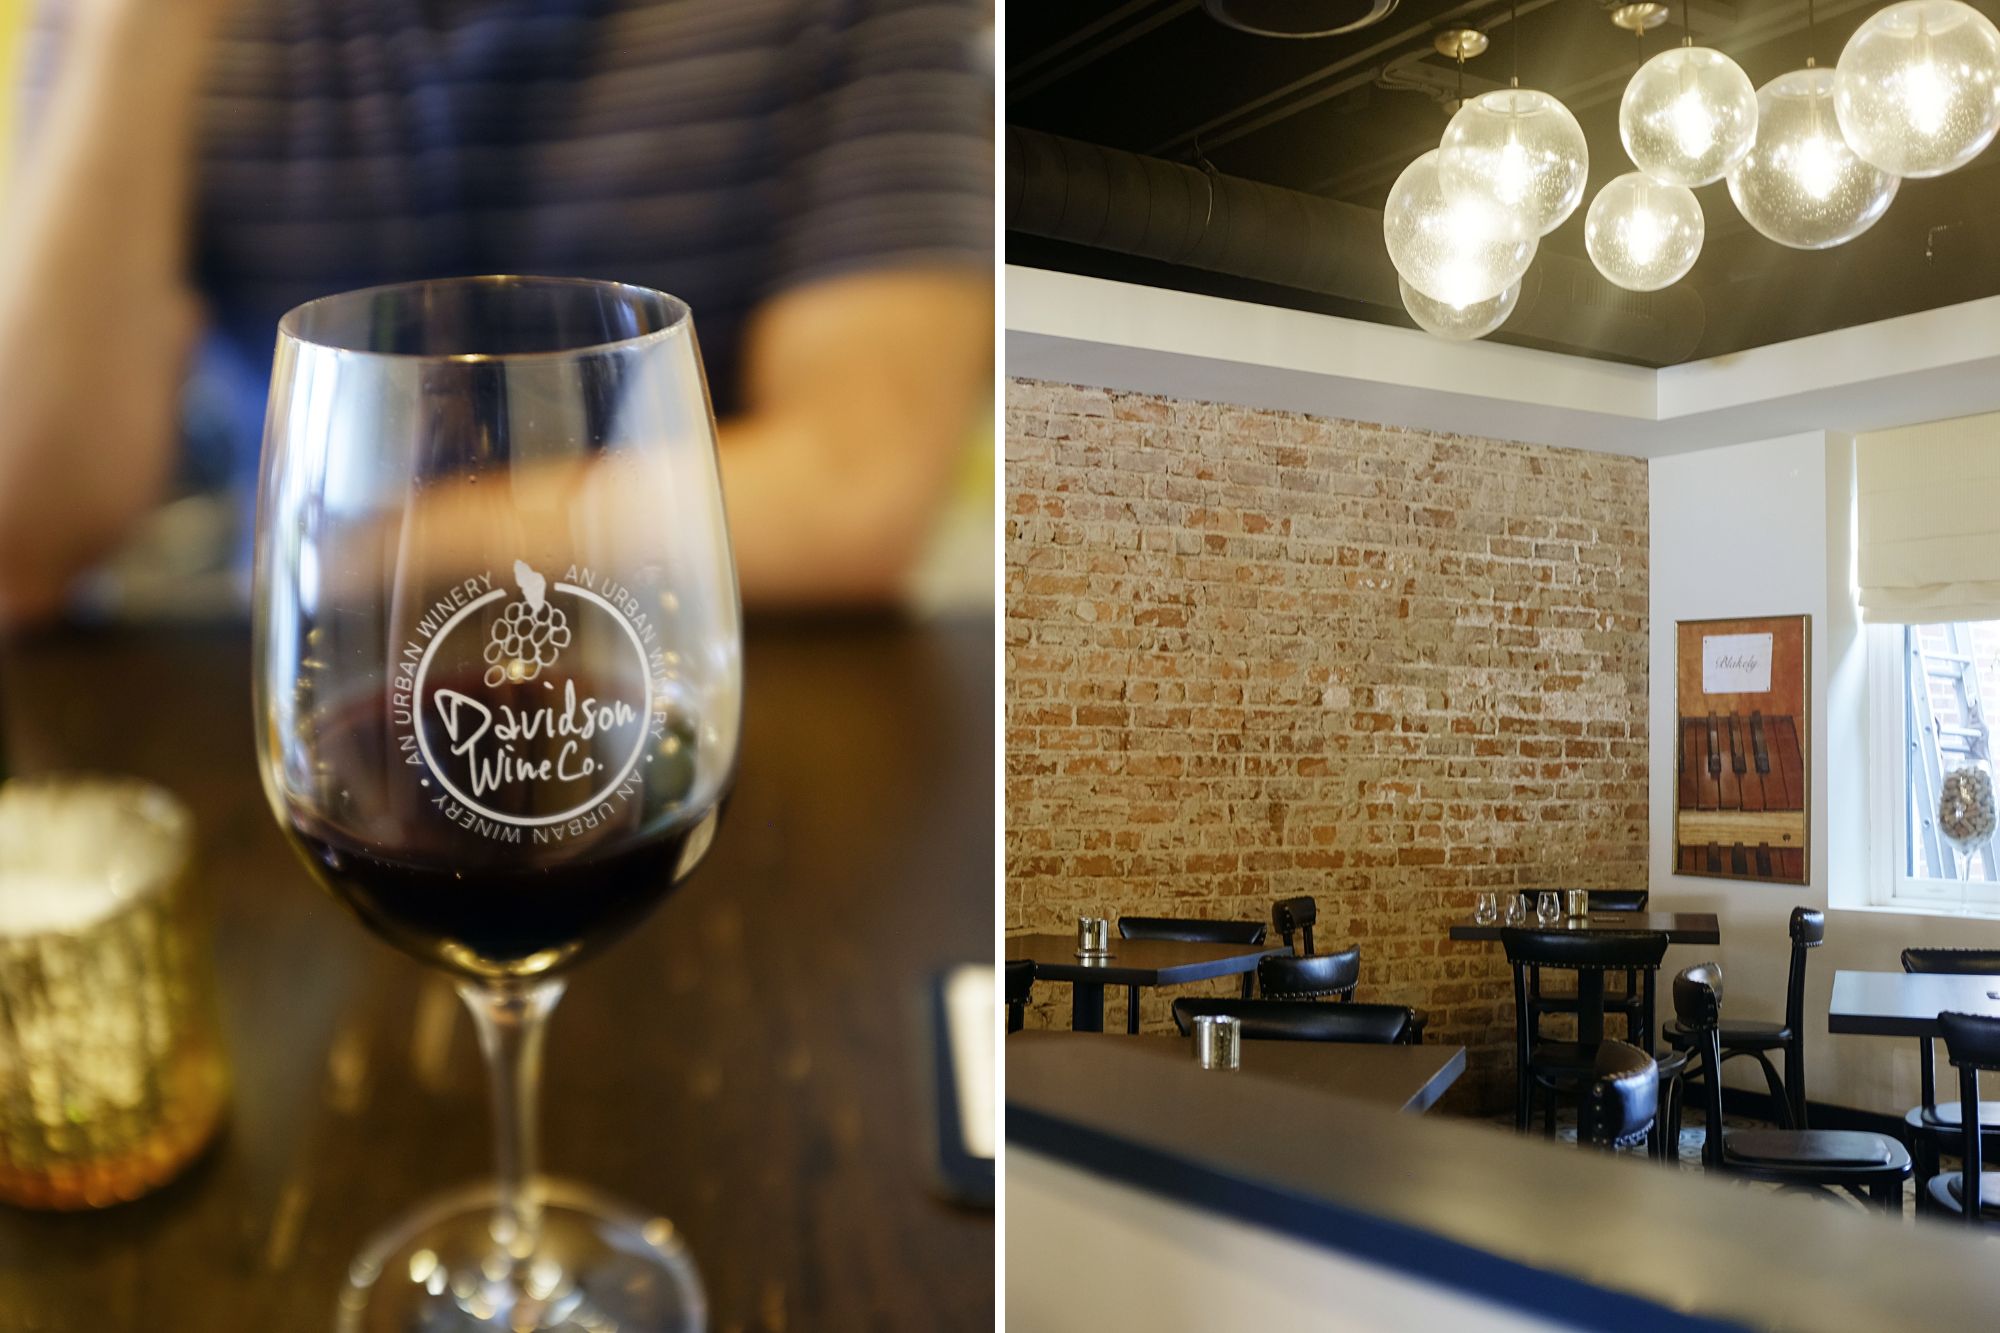 Collage: a glass of wine, and the interior of Davidson Wine Co